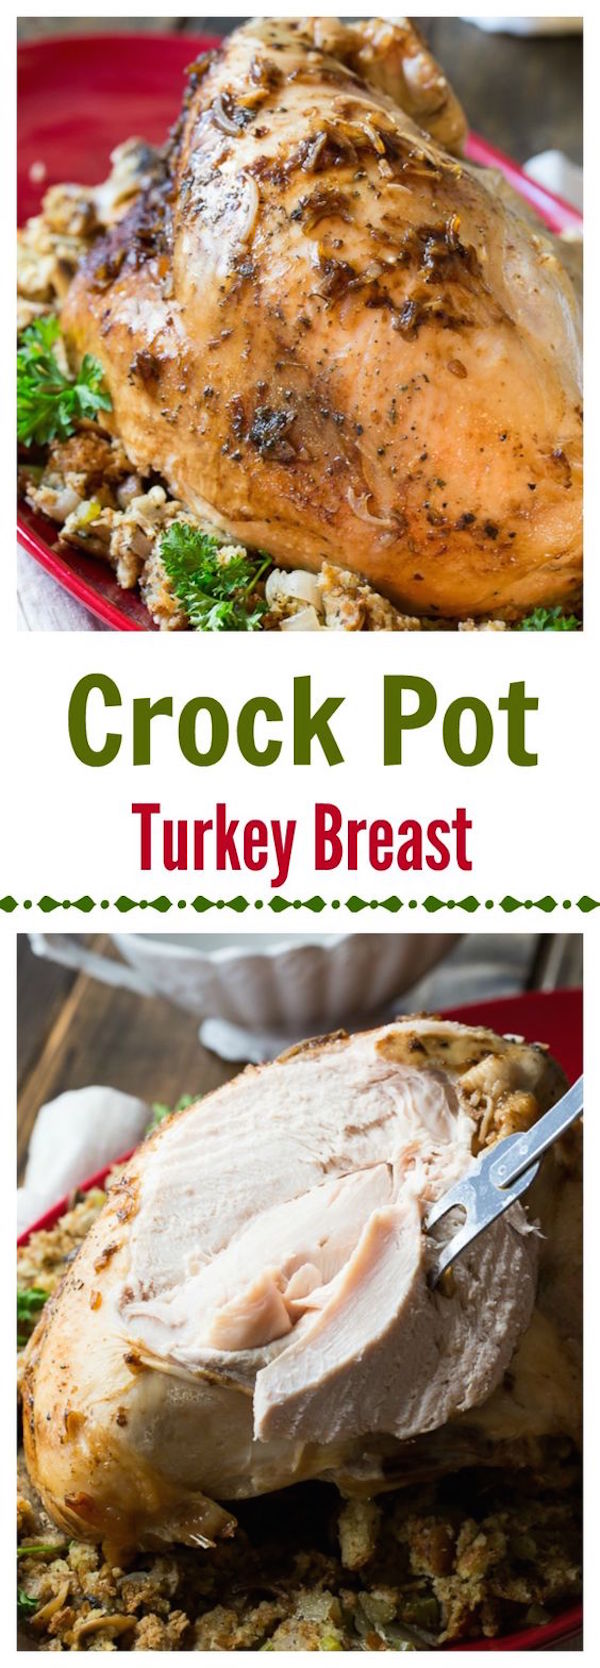 Cooking a moist and flavorful turkey becomes a breeze with this easy Crock Pot Turkey Breast recipe. A gravy can be made in just minutes